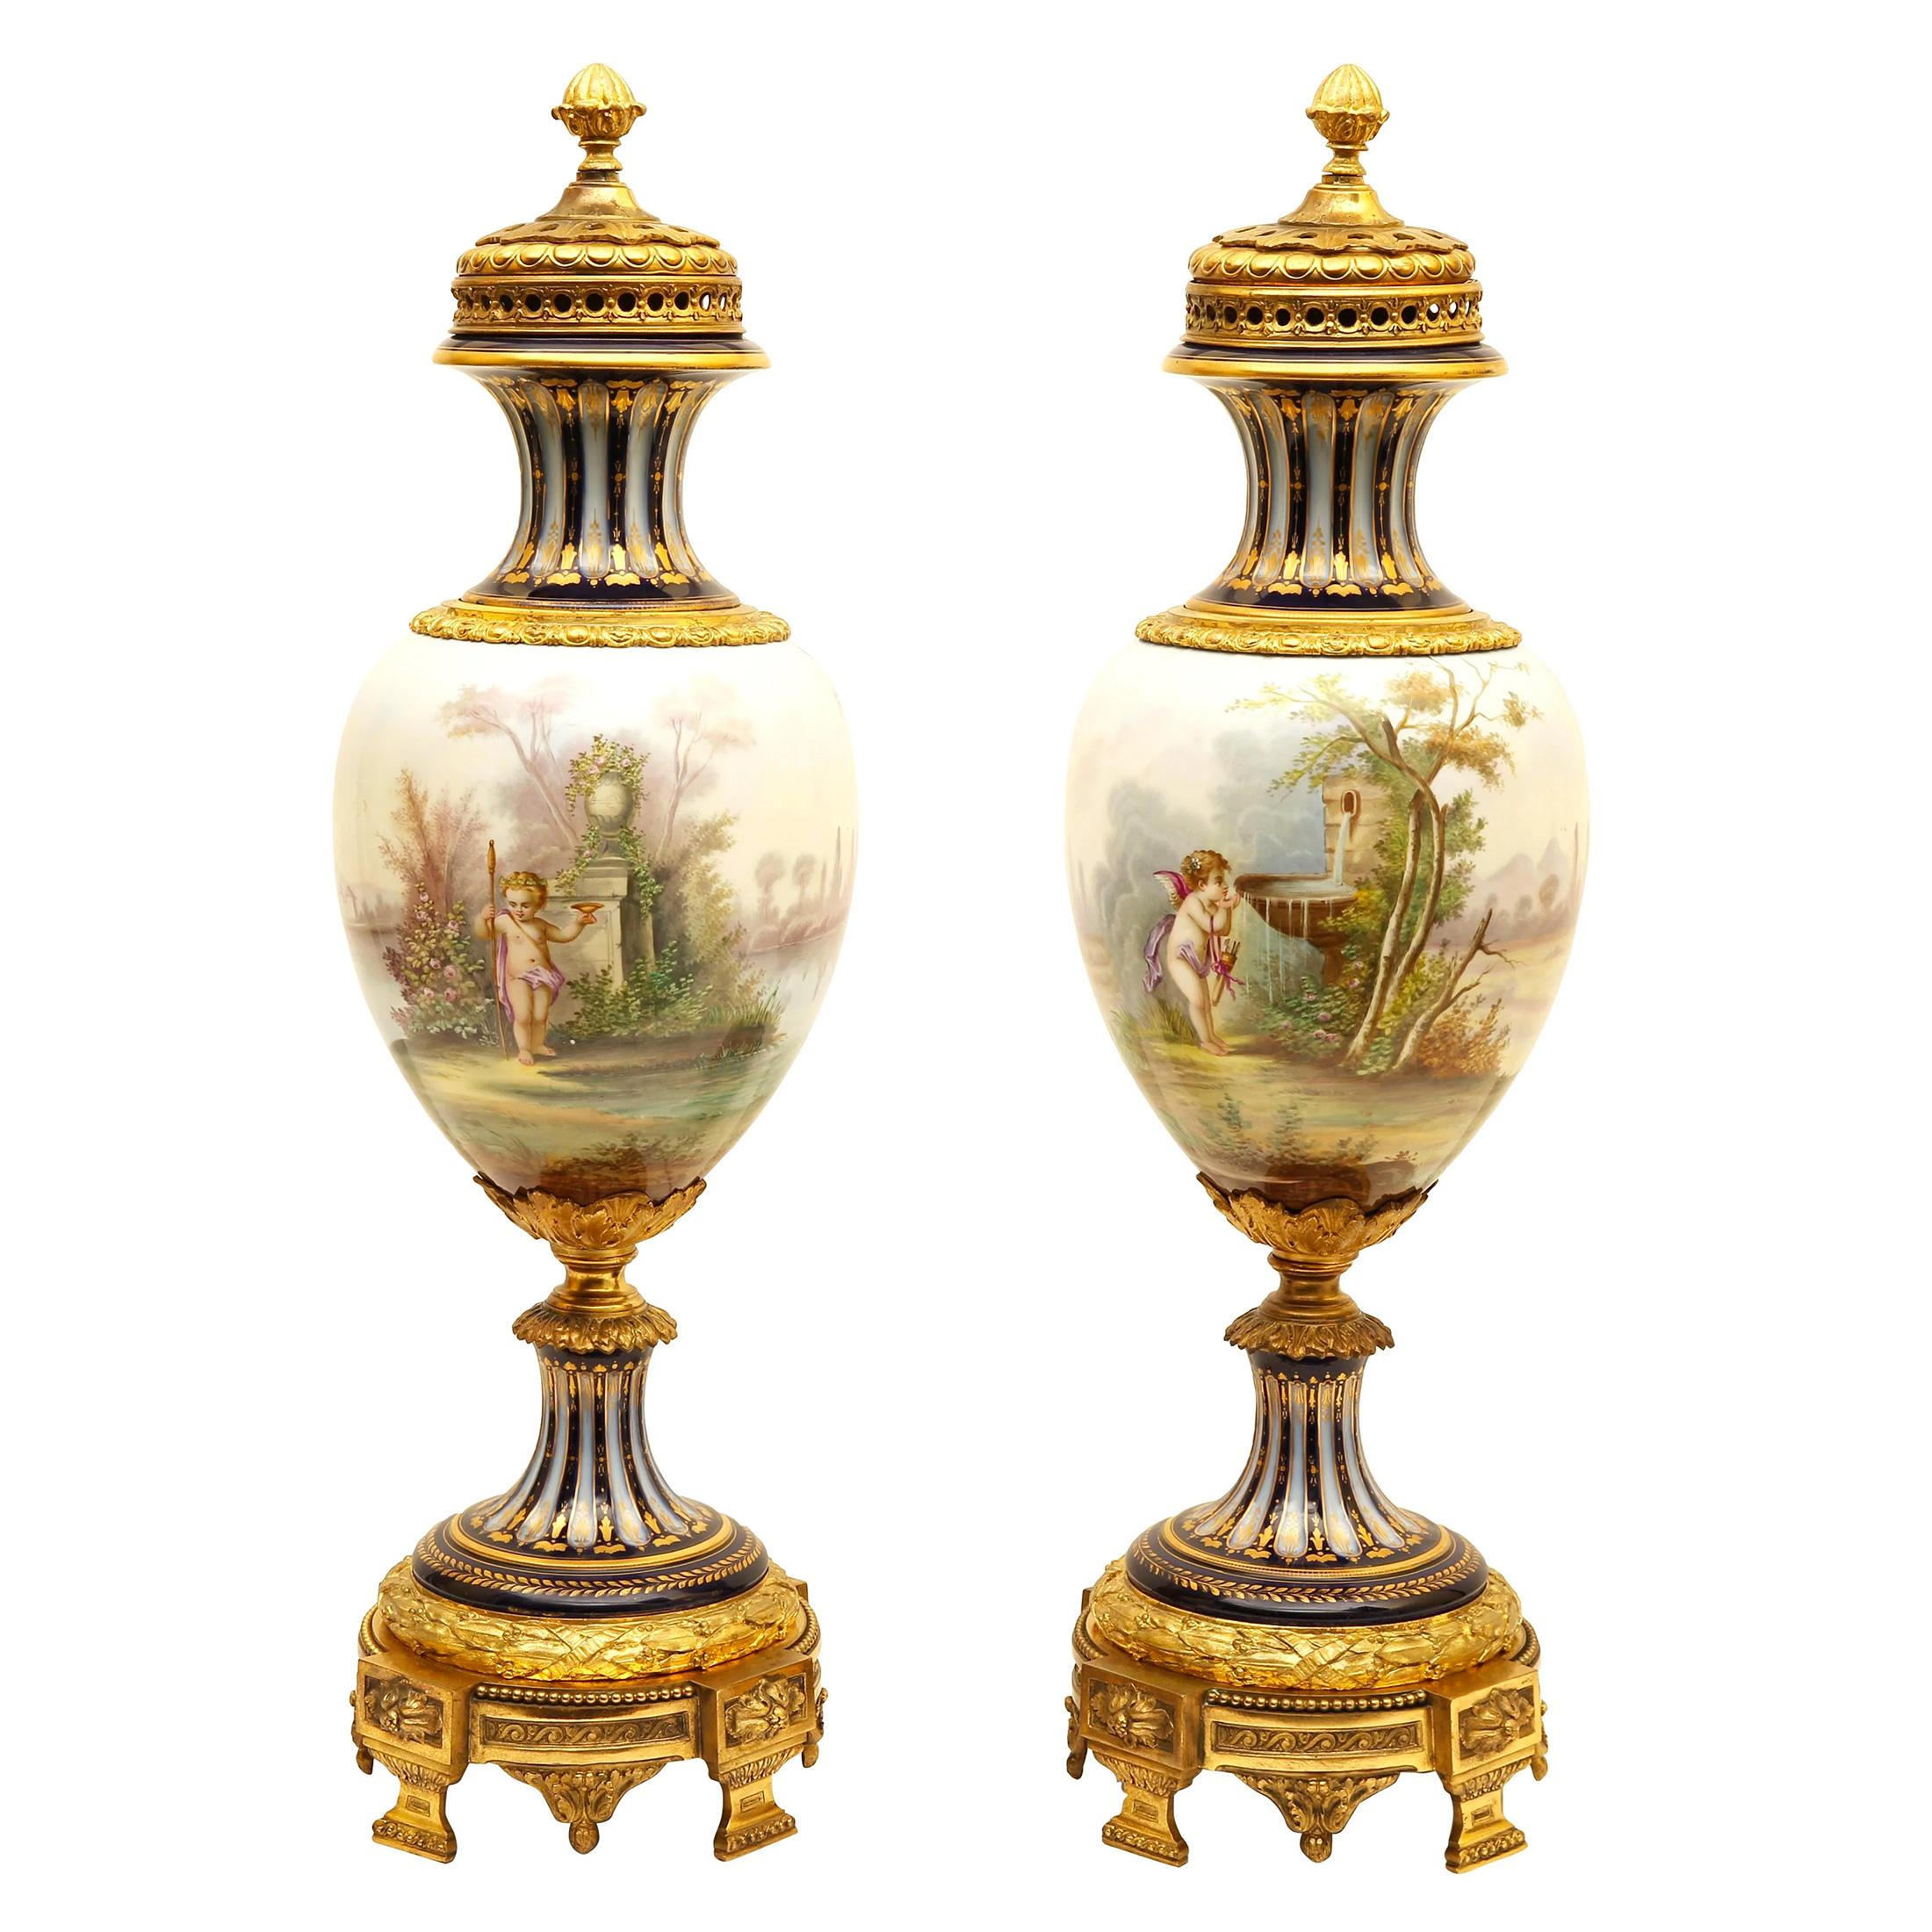 A fine quality elegant pair of bronze mounted Amphora shaped Sèvres style polychrome enamel glazed and decorated foot and covered porcelain vases. The ovoid shaped vases with a summer landscape genre scene of women and putti. a cobalt blue ground